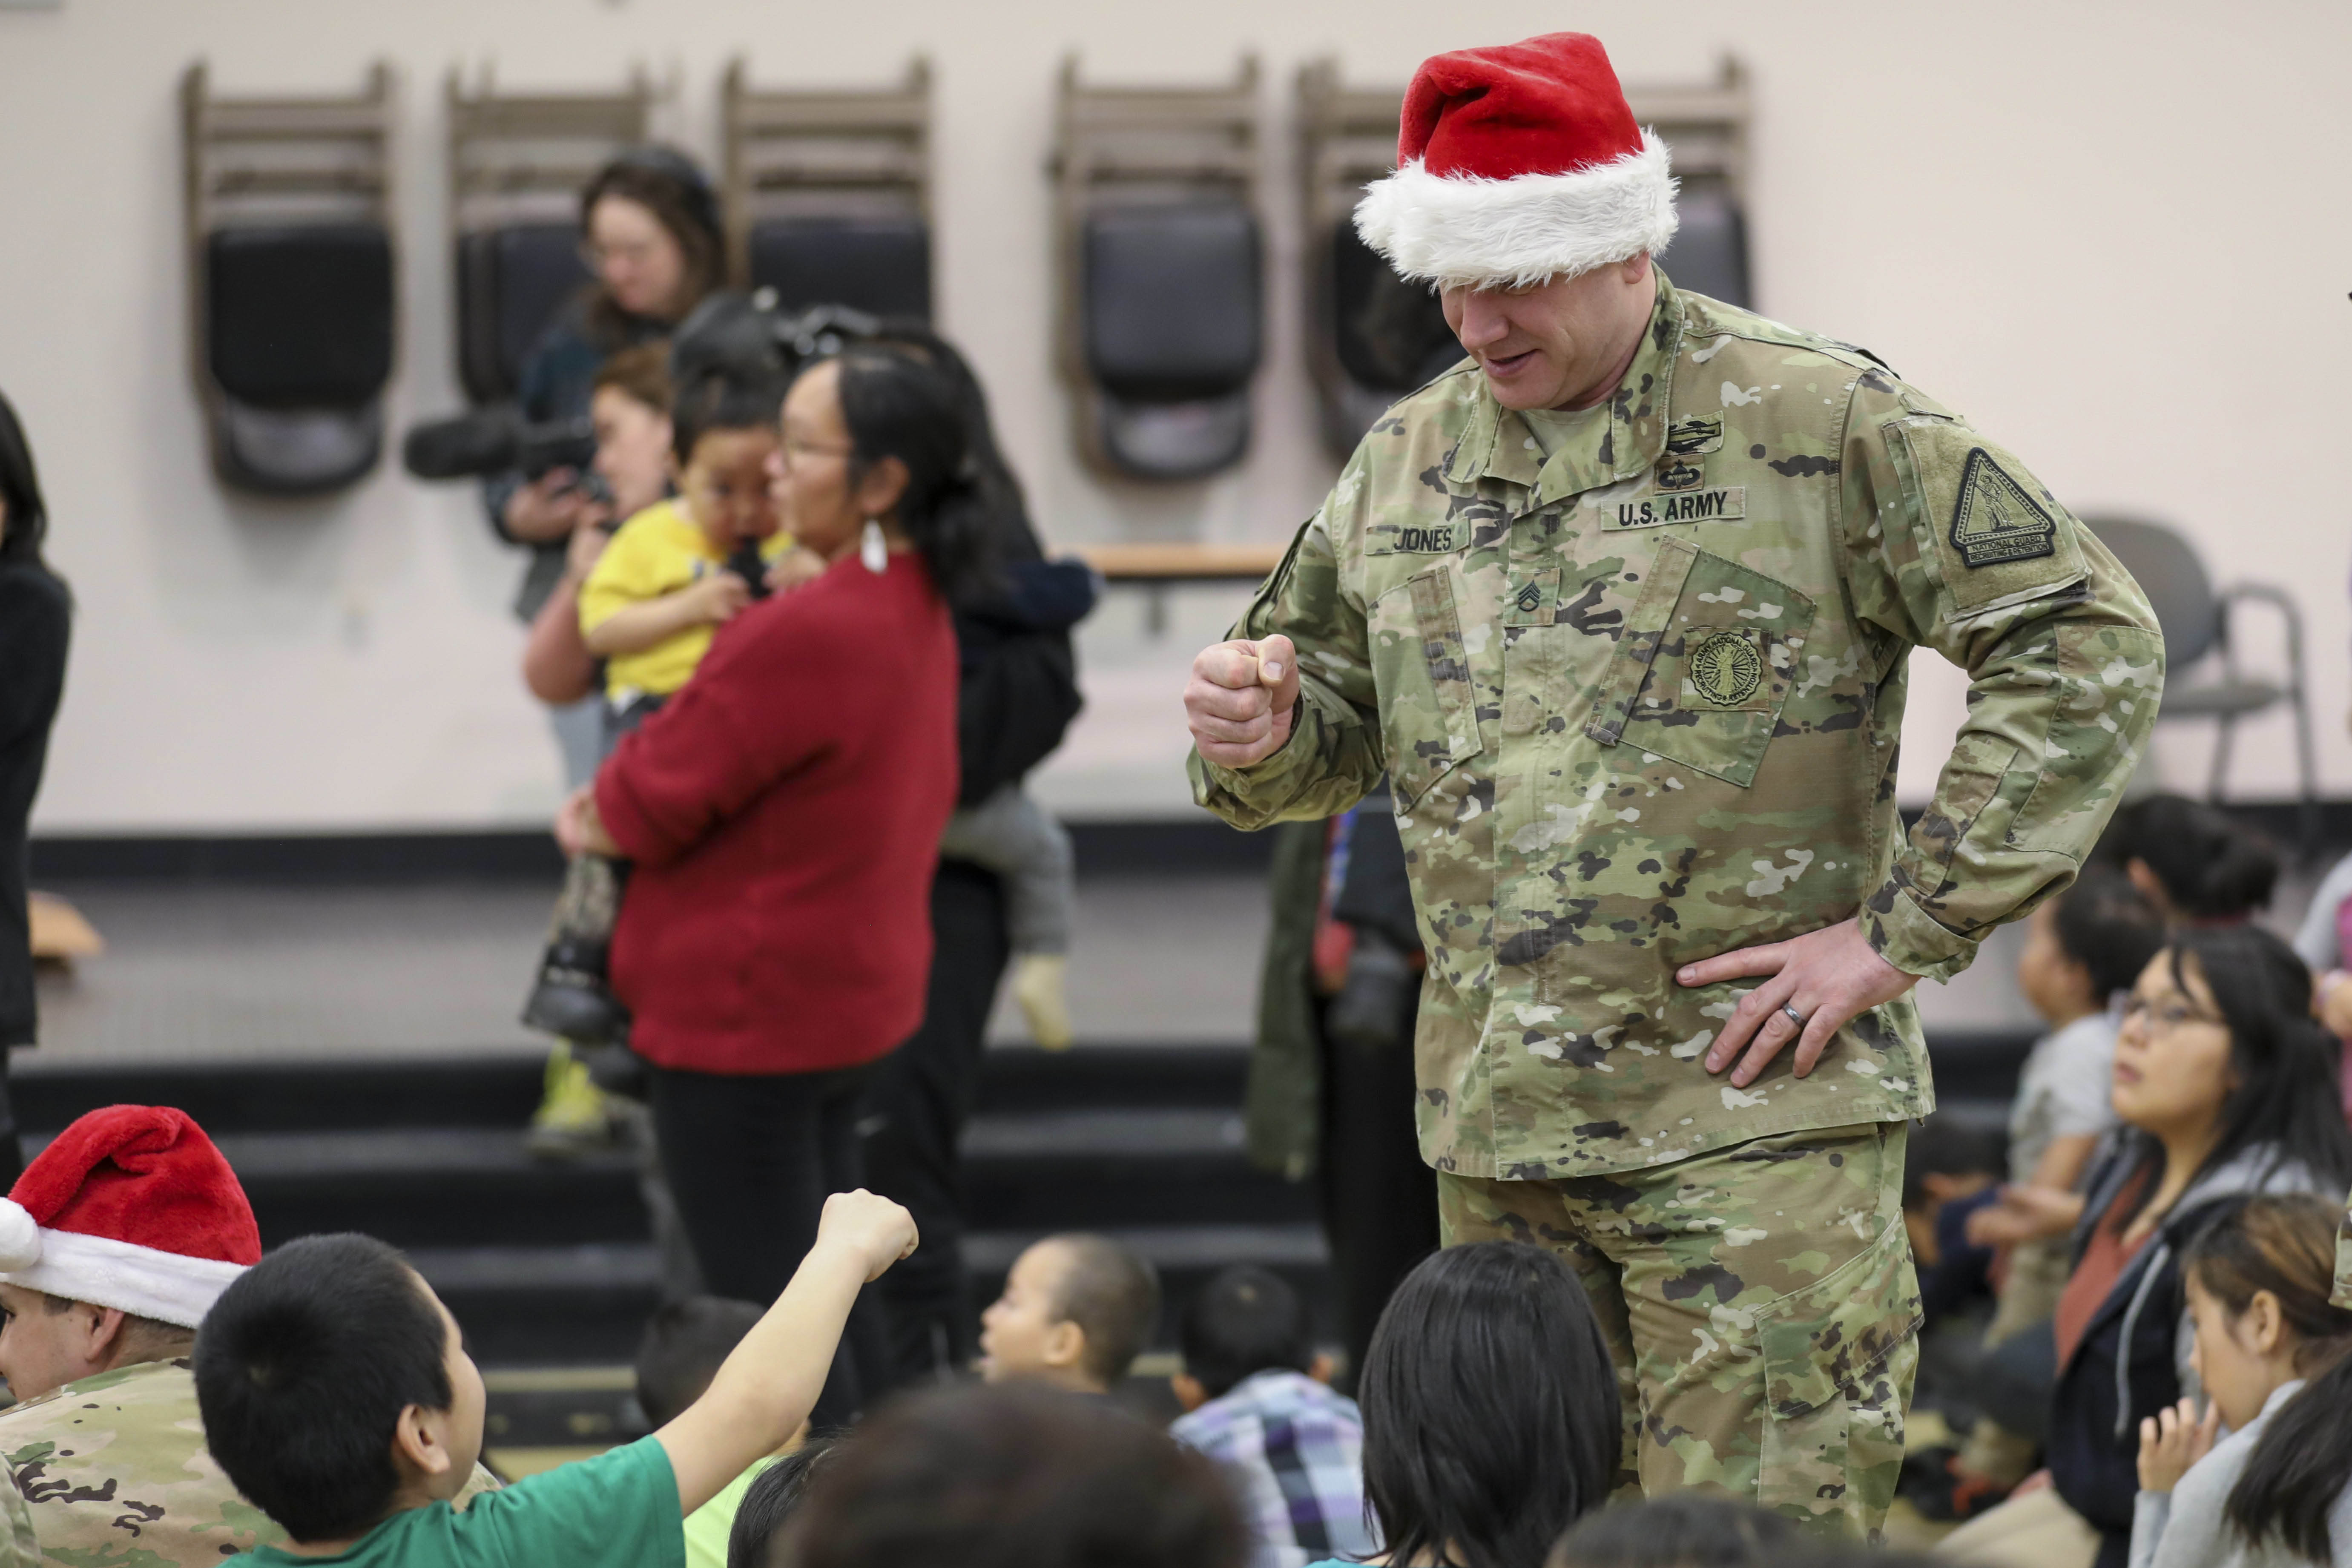 A soldier wearing a santa hat talks to a group of children